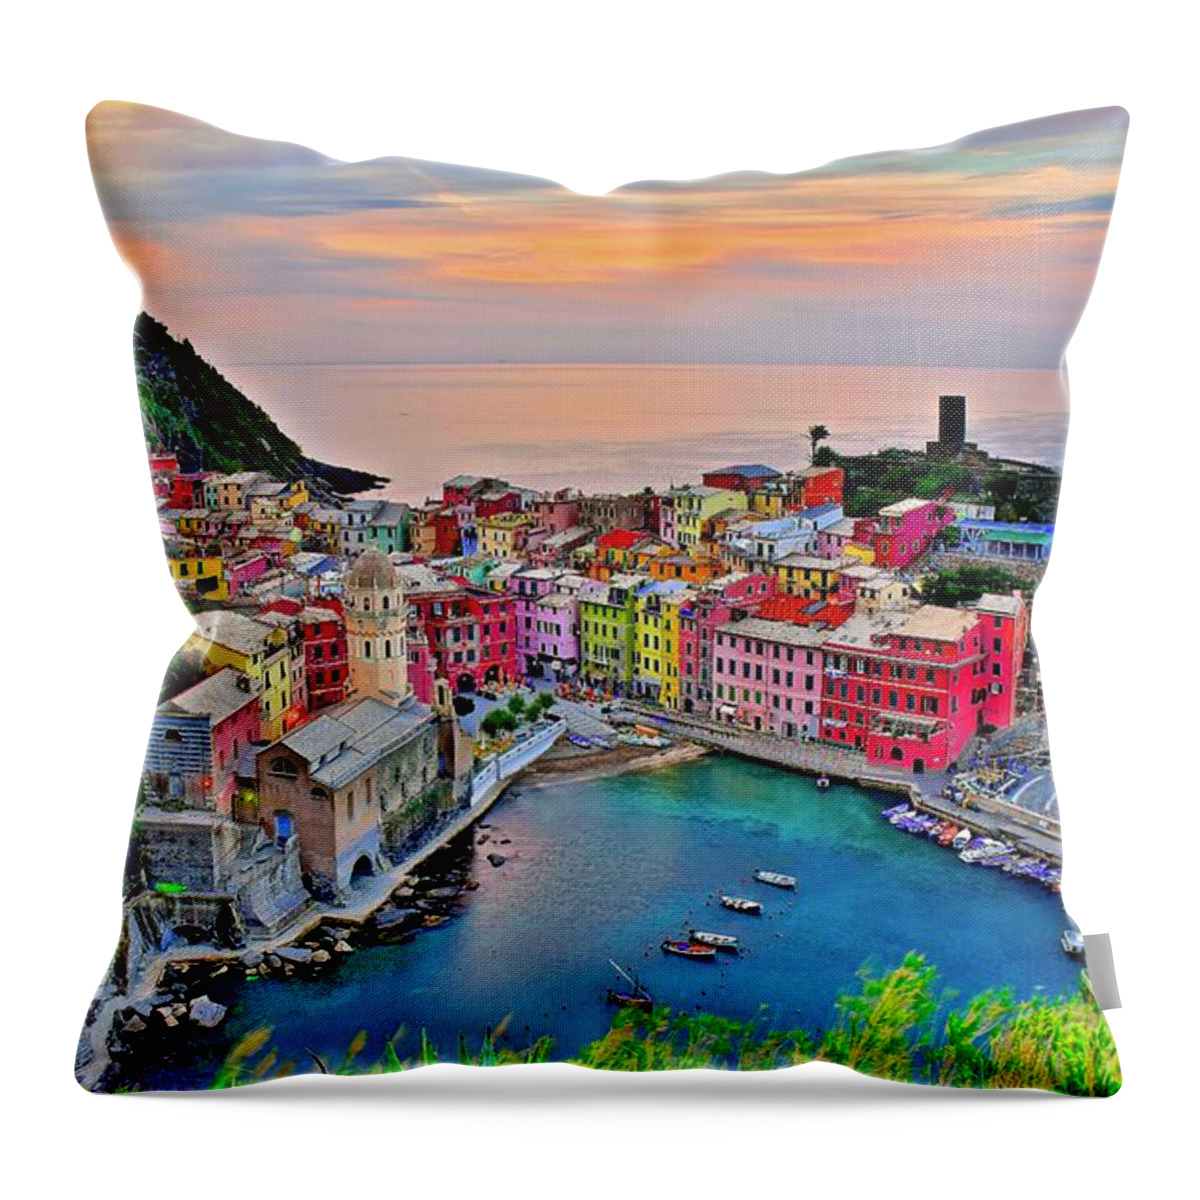 Vernazza Throw Pillow featuring the photograph Glorious Sunrise behind Vernazza by Frozen in Time Fine Art Photography